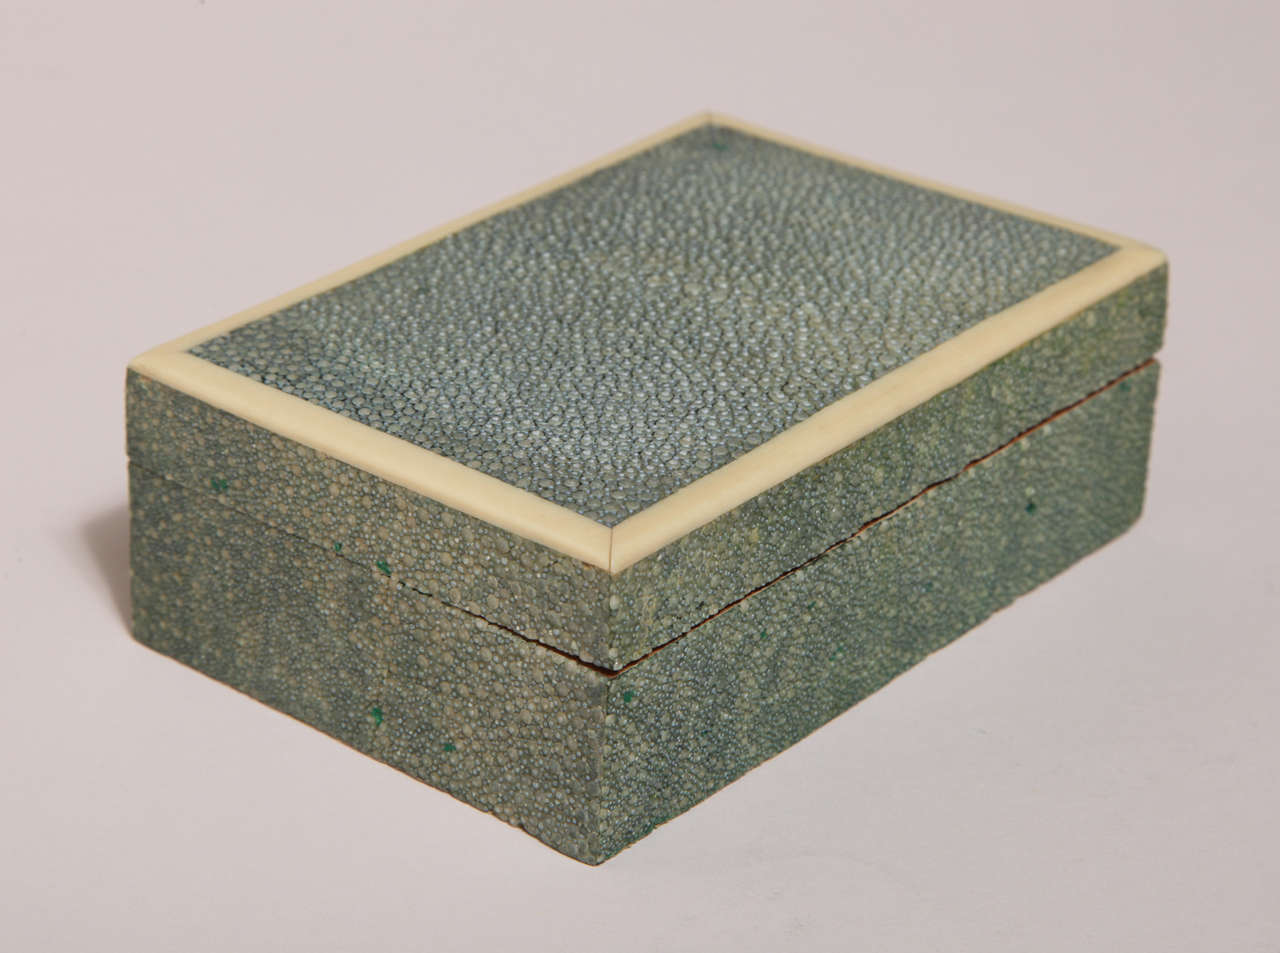 Green shagreen box with faux ivory stringing around the top.

*Variety of other shagreen boxes available.

(Price shown is reduced price, no further trade discount)